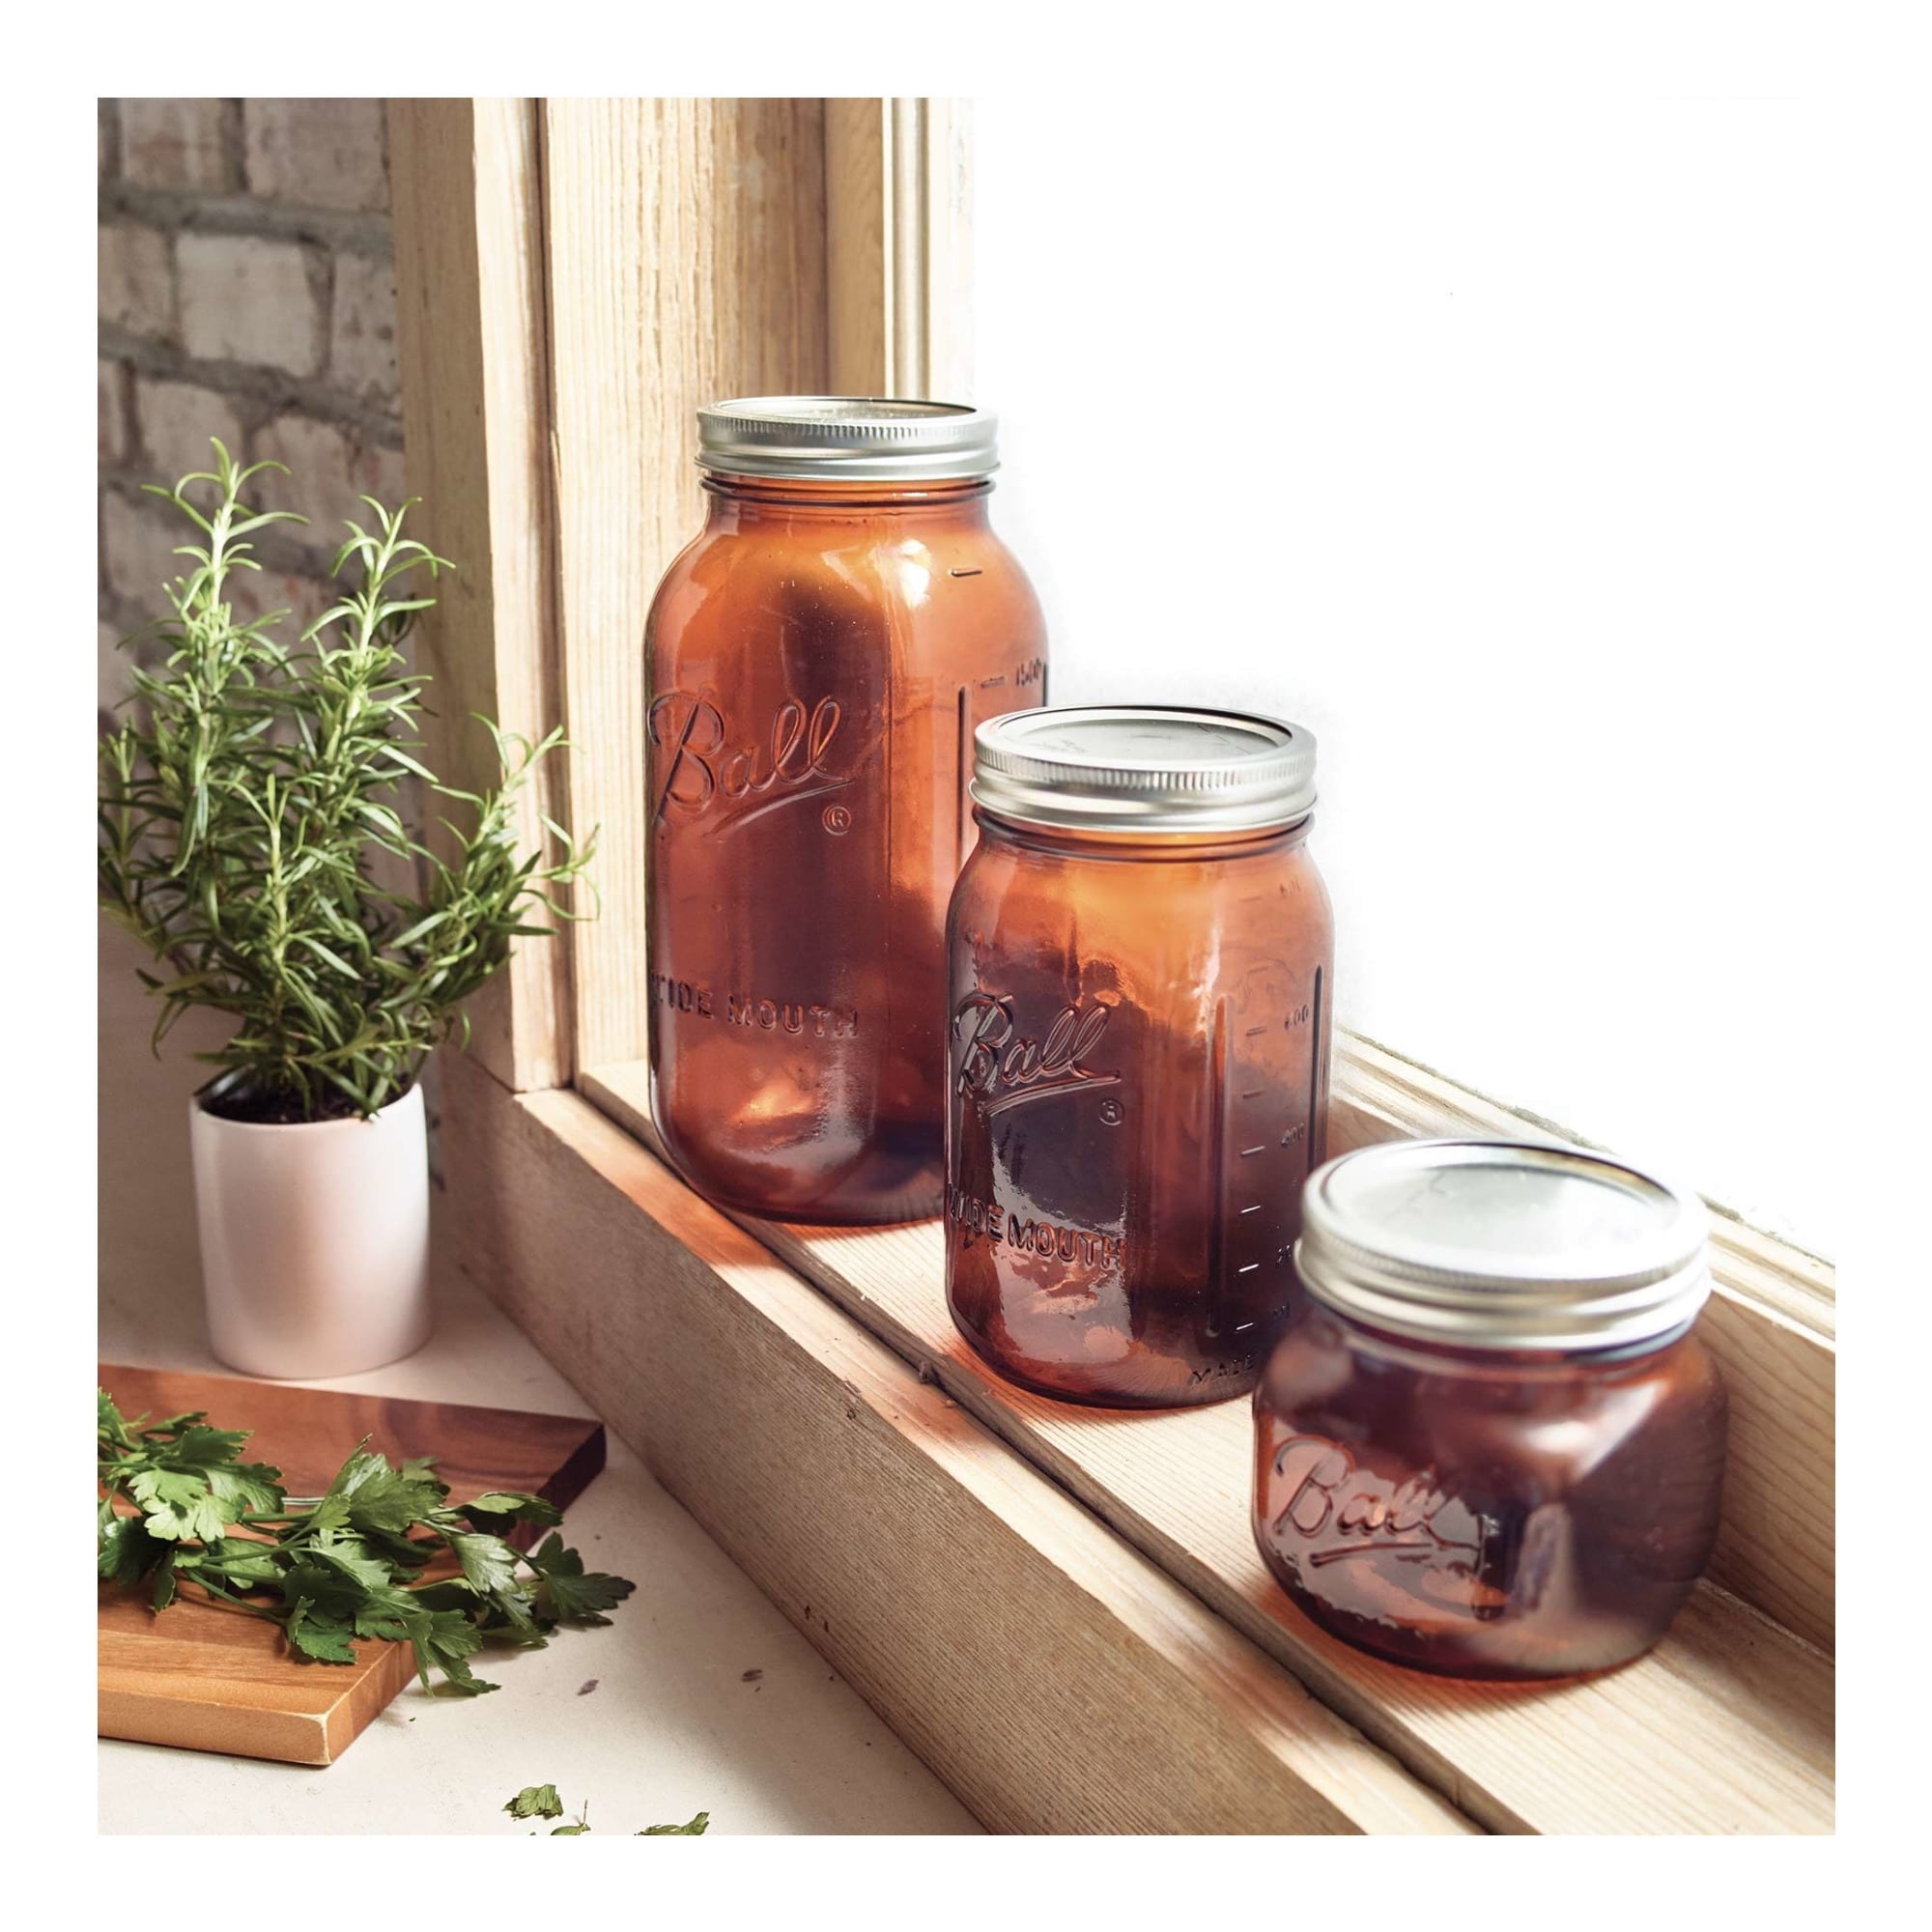 https://ak1.ostkcdn.com/images/products/is/images/direct/7cdd4f13039a3d43a169686936038cba0a269e65/Wide-Mouth-16oz-Amber-Mason-Jar-MultiPack-%2820-Pack%29.jpg